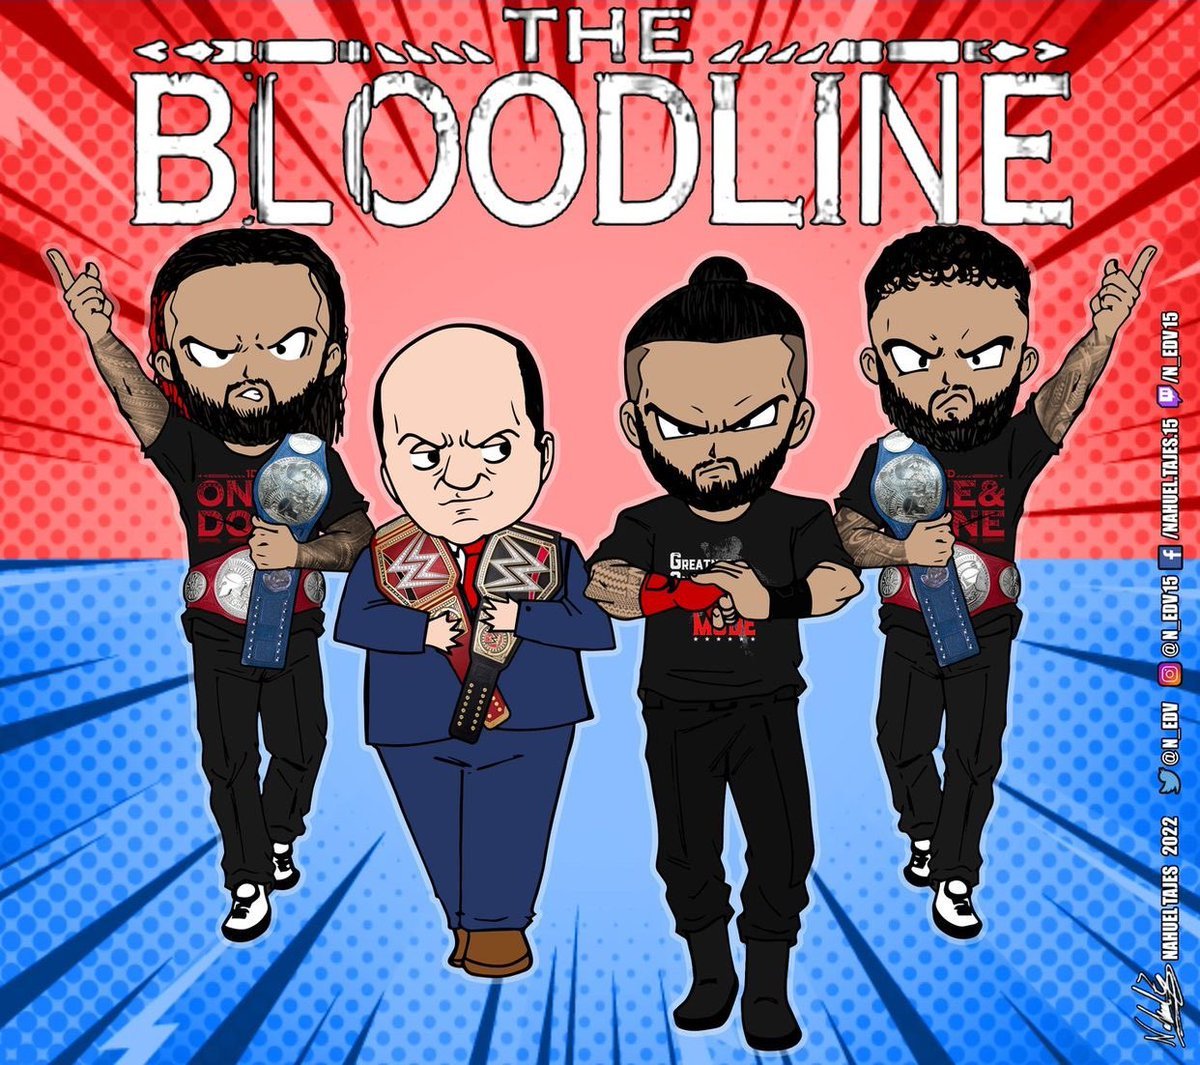 Paul Heyman THE BLOODLINE! The accomplishments of the #Bloodline simply cannot be overstated. Let's look at it from a historical perspective. READ THE WHOLE POST